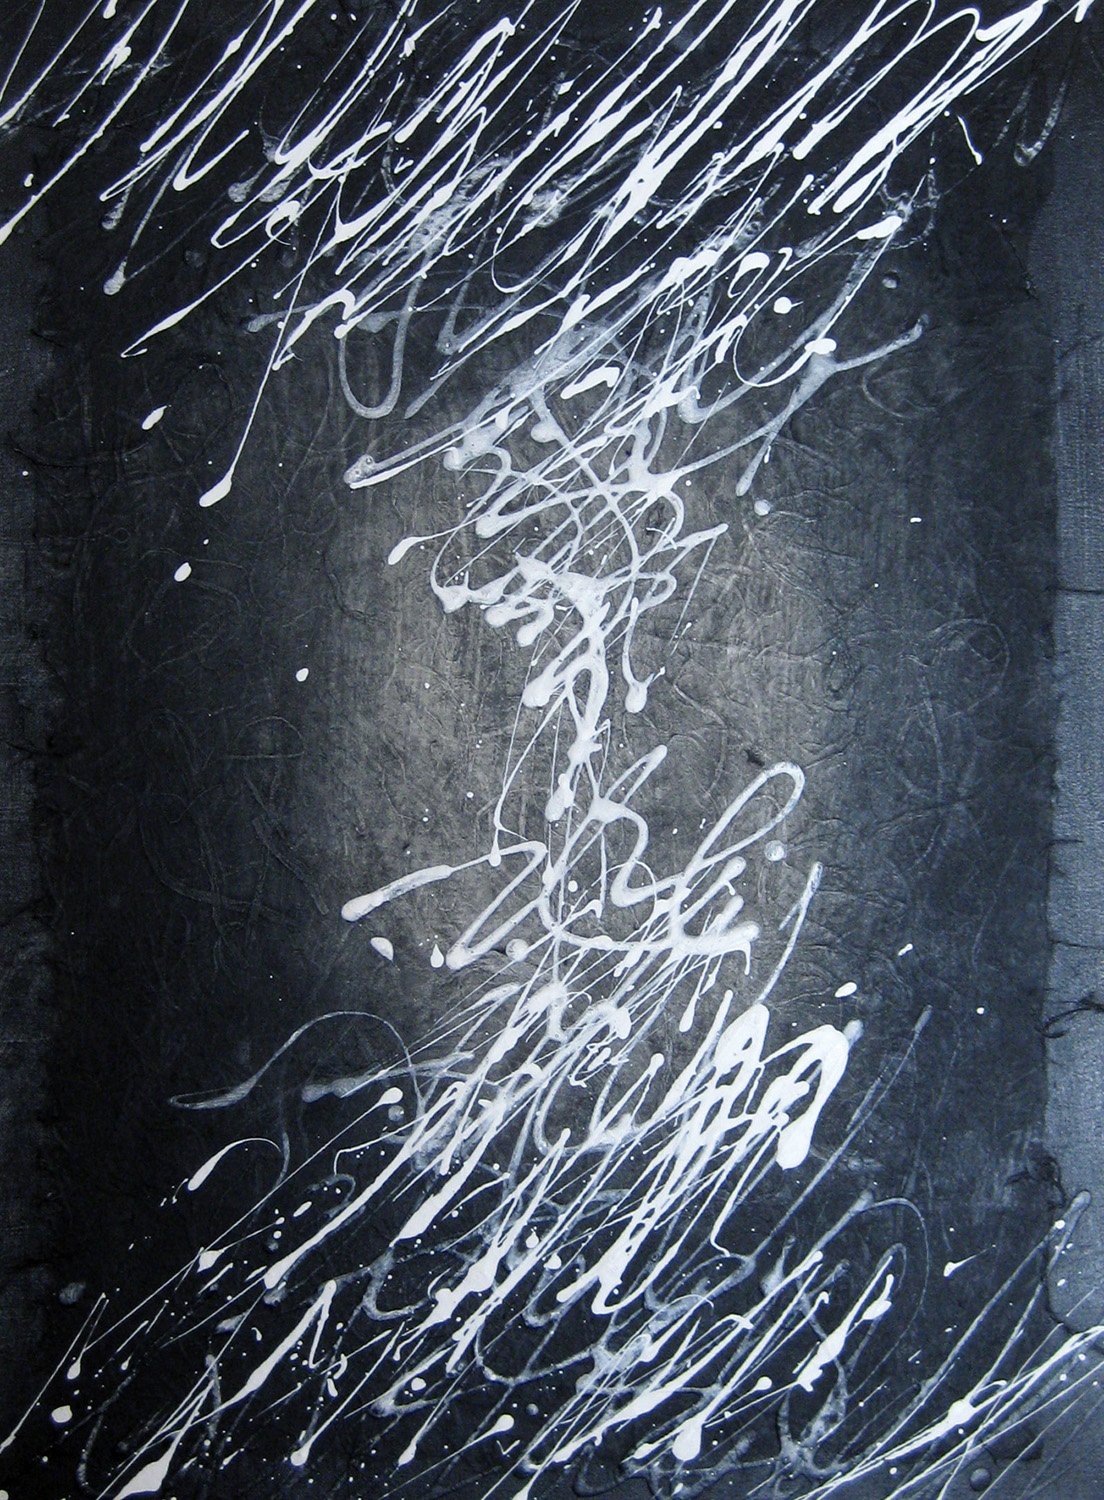   Third Script #8 , 2006, acrylic on canvas on mulberry paper, 18” x 24”,  Private Collection 